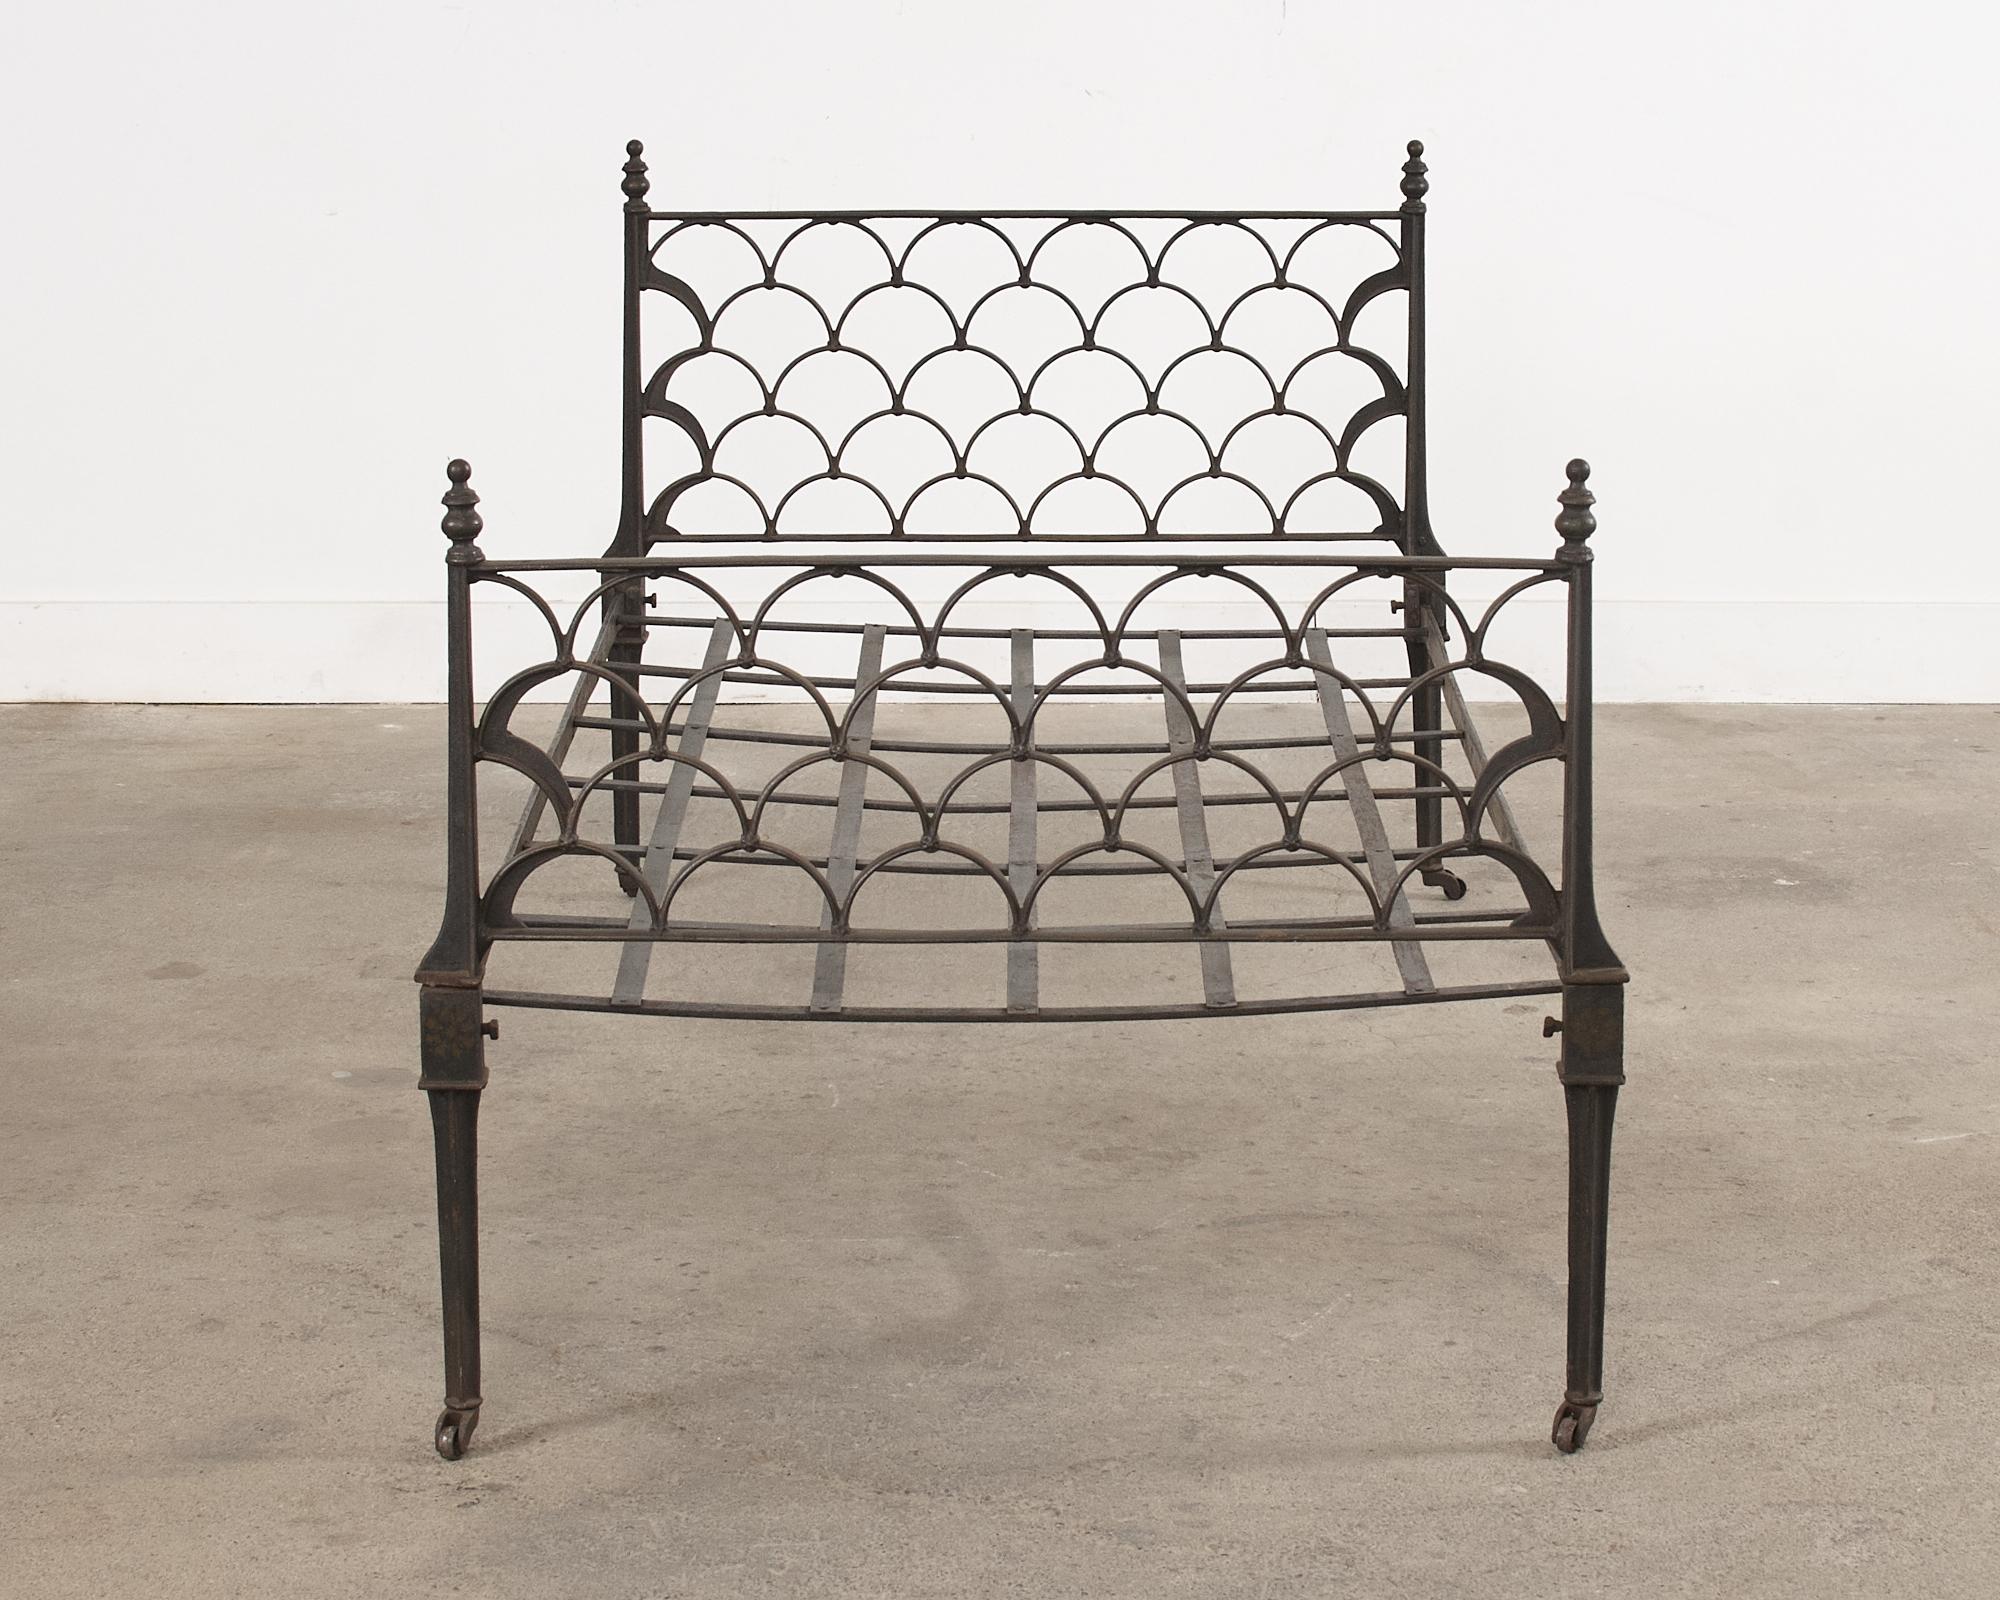 Distinctive French art deco daybed constructed from cast iron. The bed features a headboard and footboard decorated with gracefully curved arches in a geometric pattern. The corners of the bed have graduating round finials. The bed is supported by